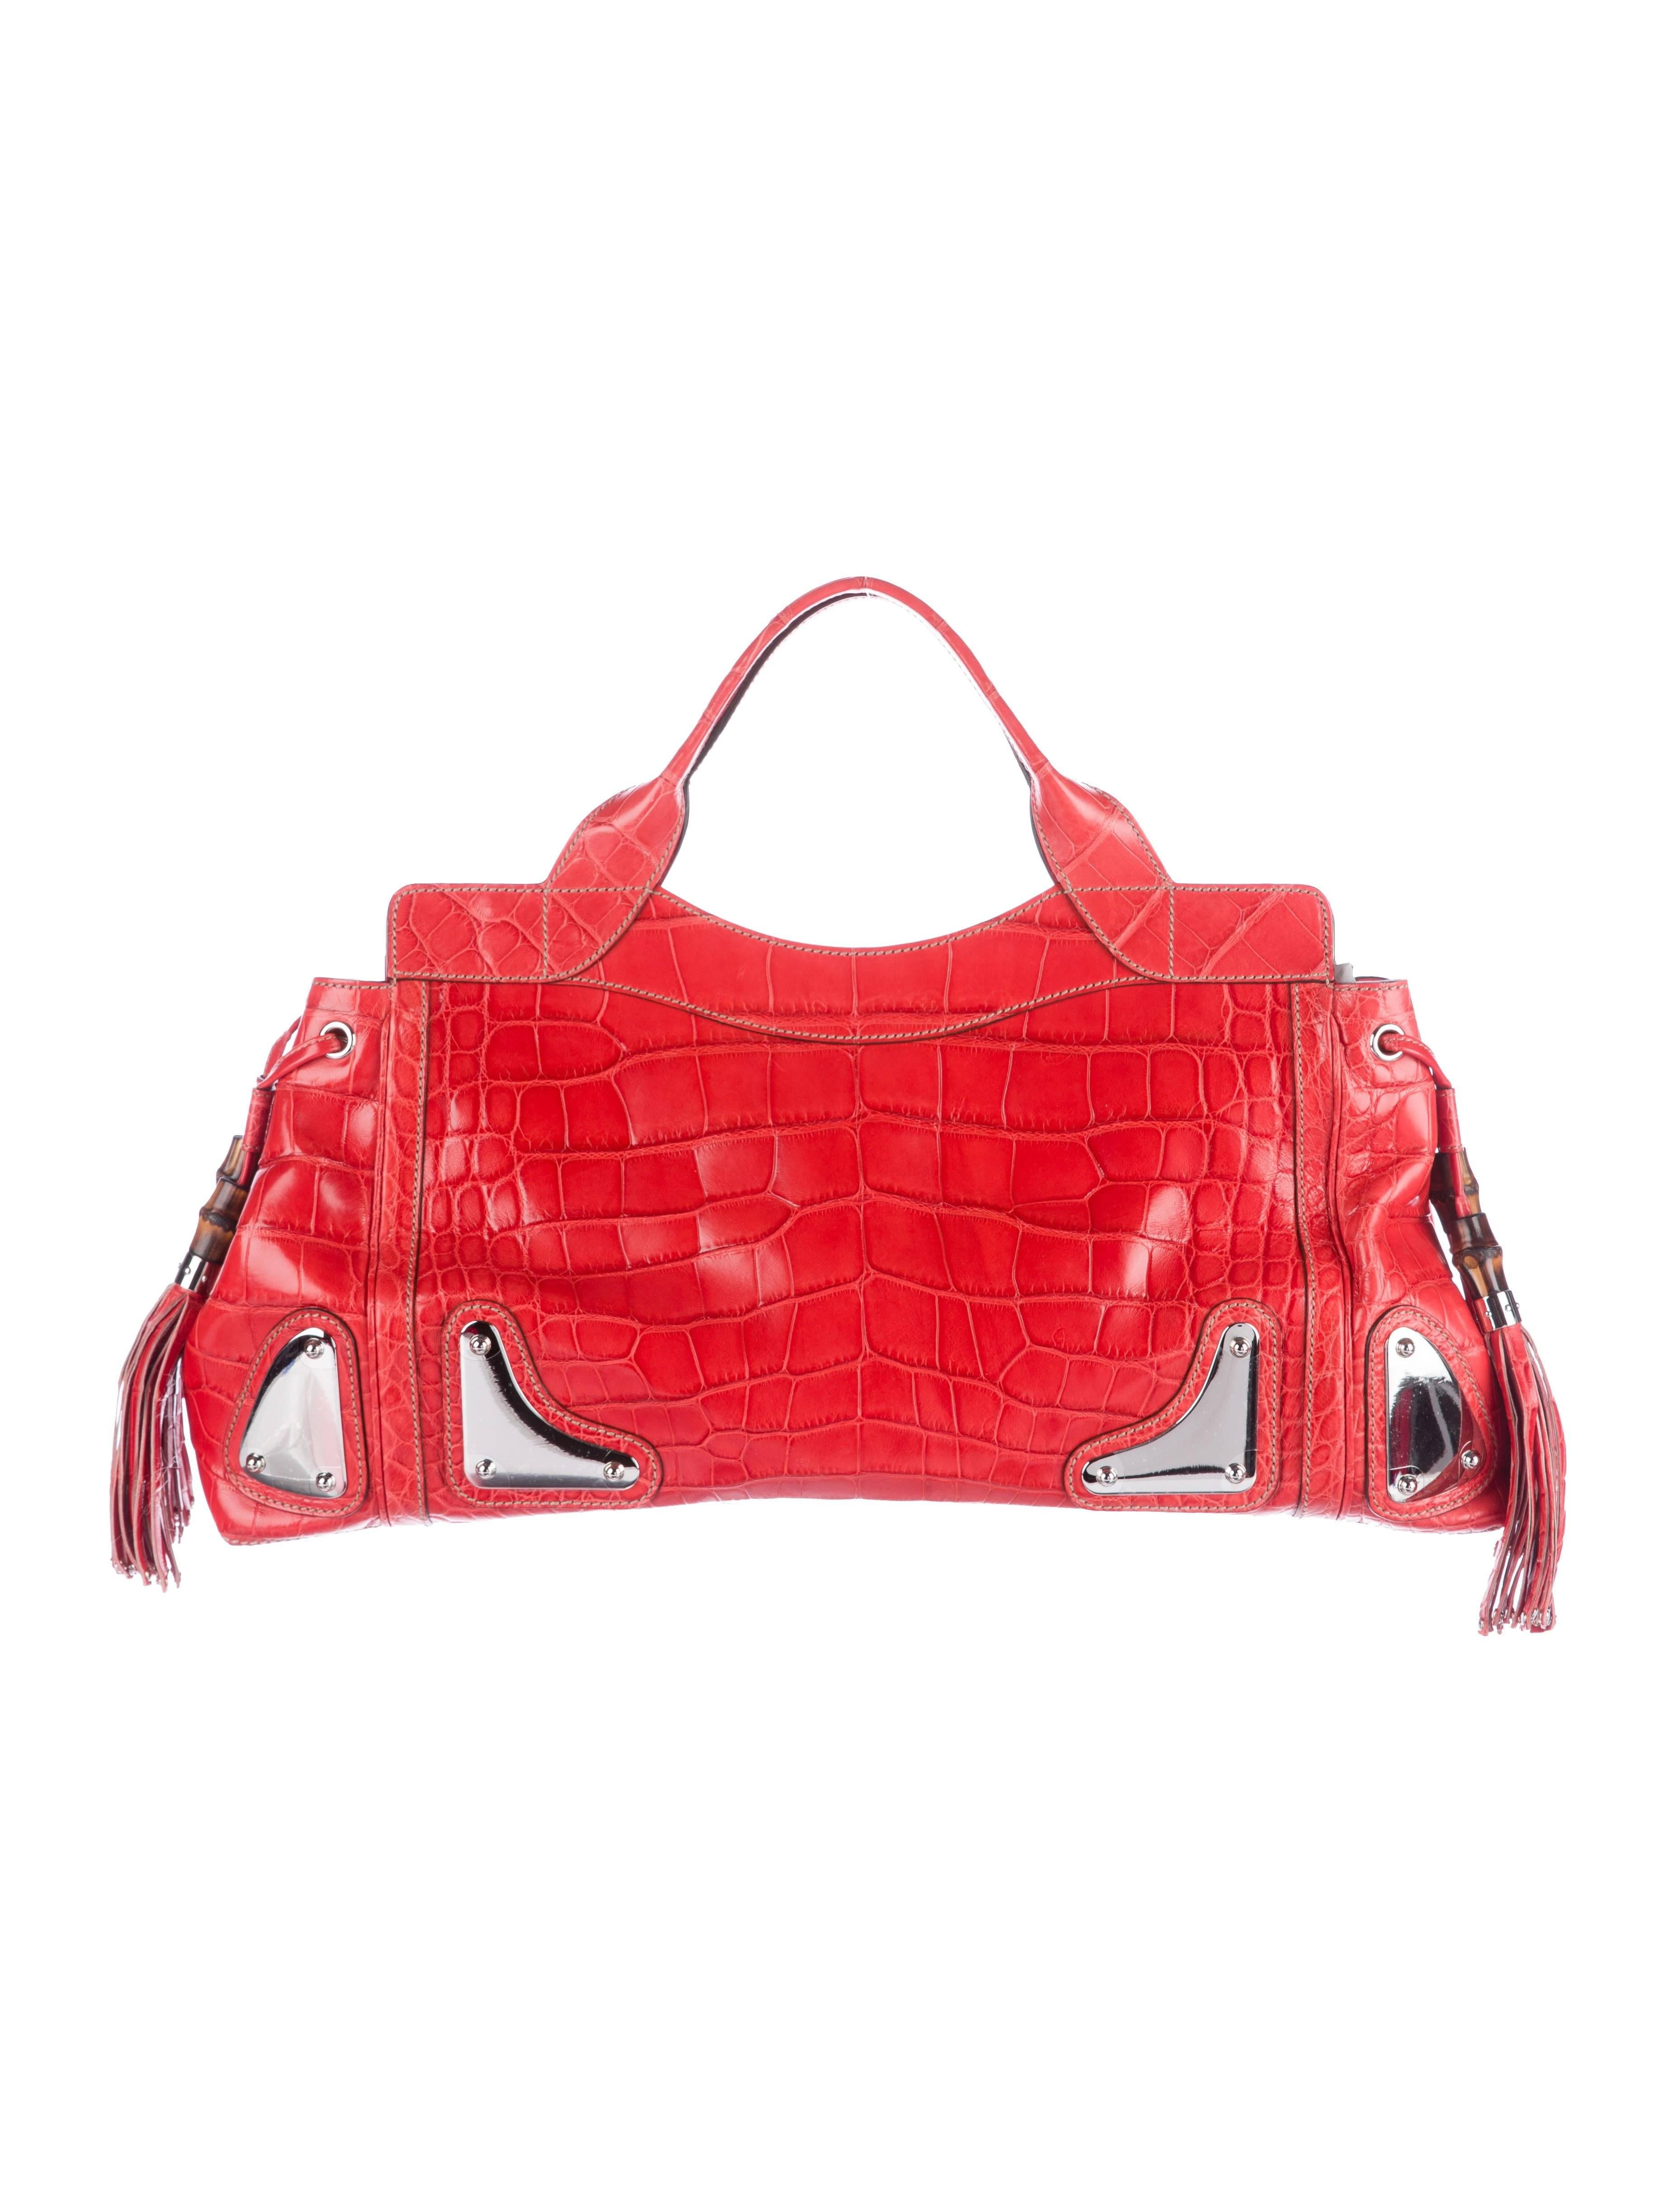 Gucci Red Crocodile Exotic Skin Leather Evening Top Handle Satchel Bag in Box In Good Condition In Chicago, IL